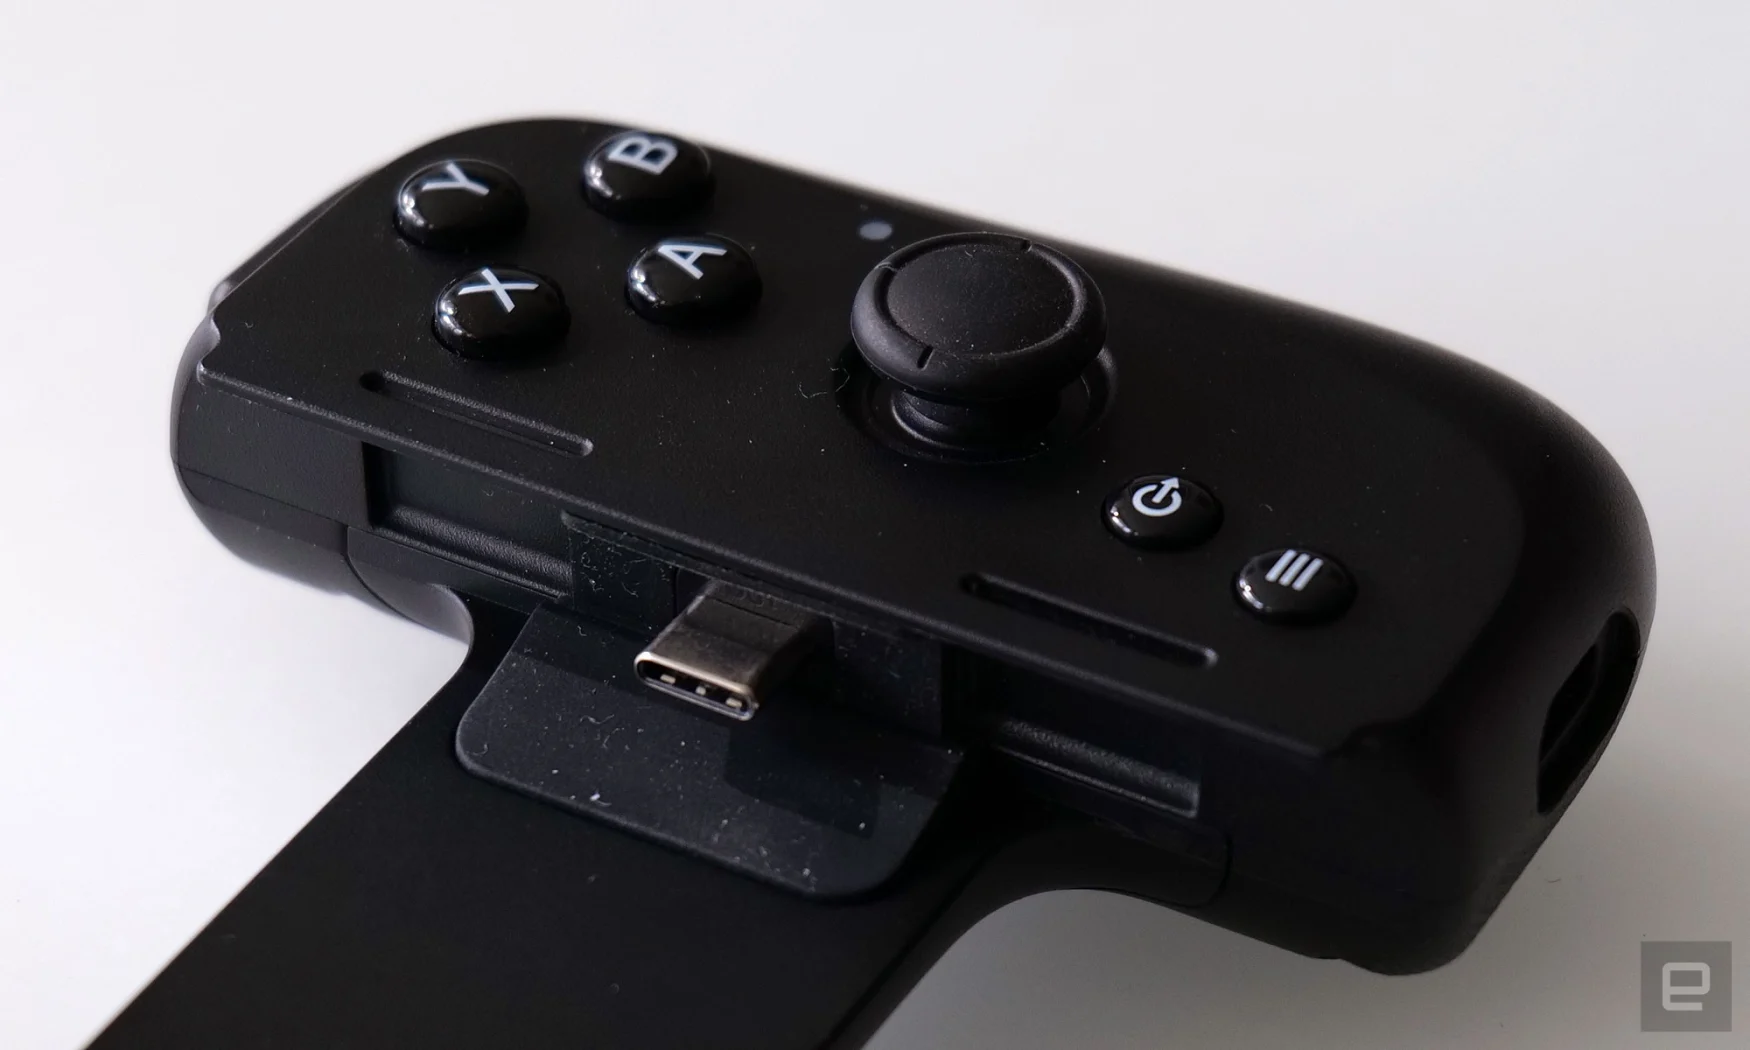 Connecting the Edge to its included controller is as simple as lining up the USB-C jack on the right and extending the Kishi V2 Pro to fit around the device. 